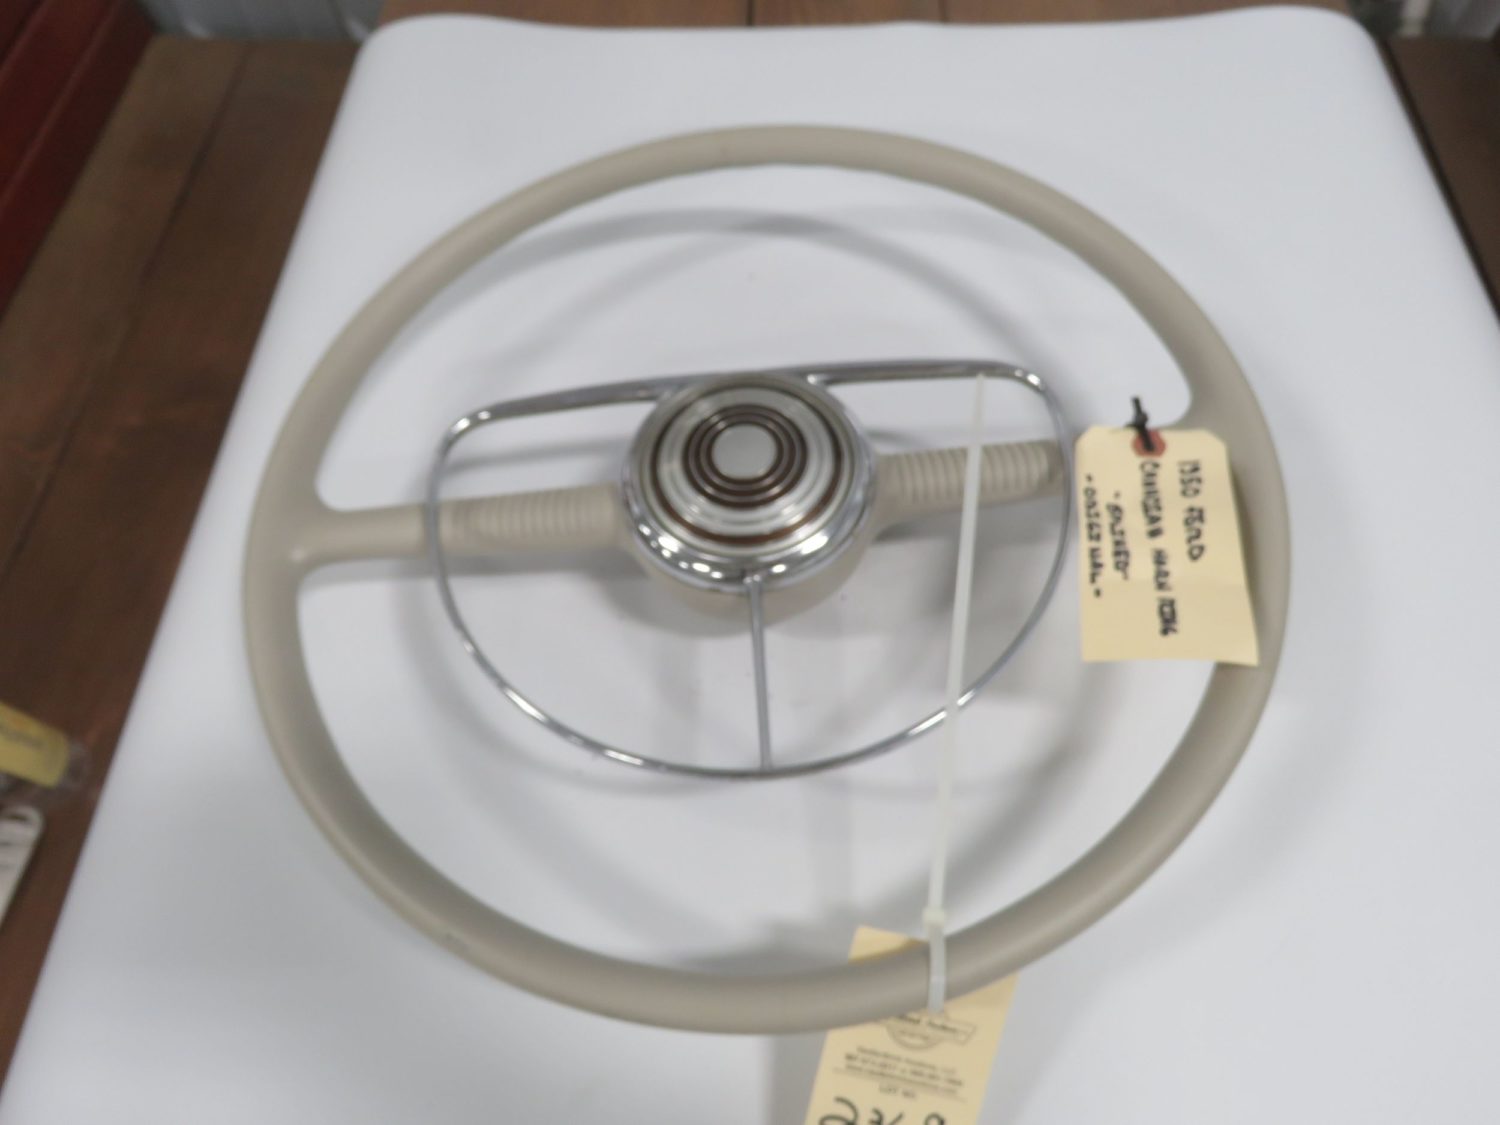 1950 Ford Canadian Steering Wheel - Image 1